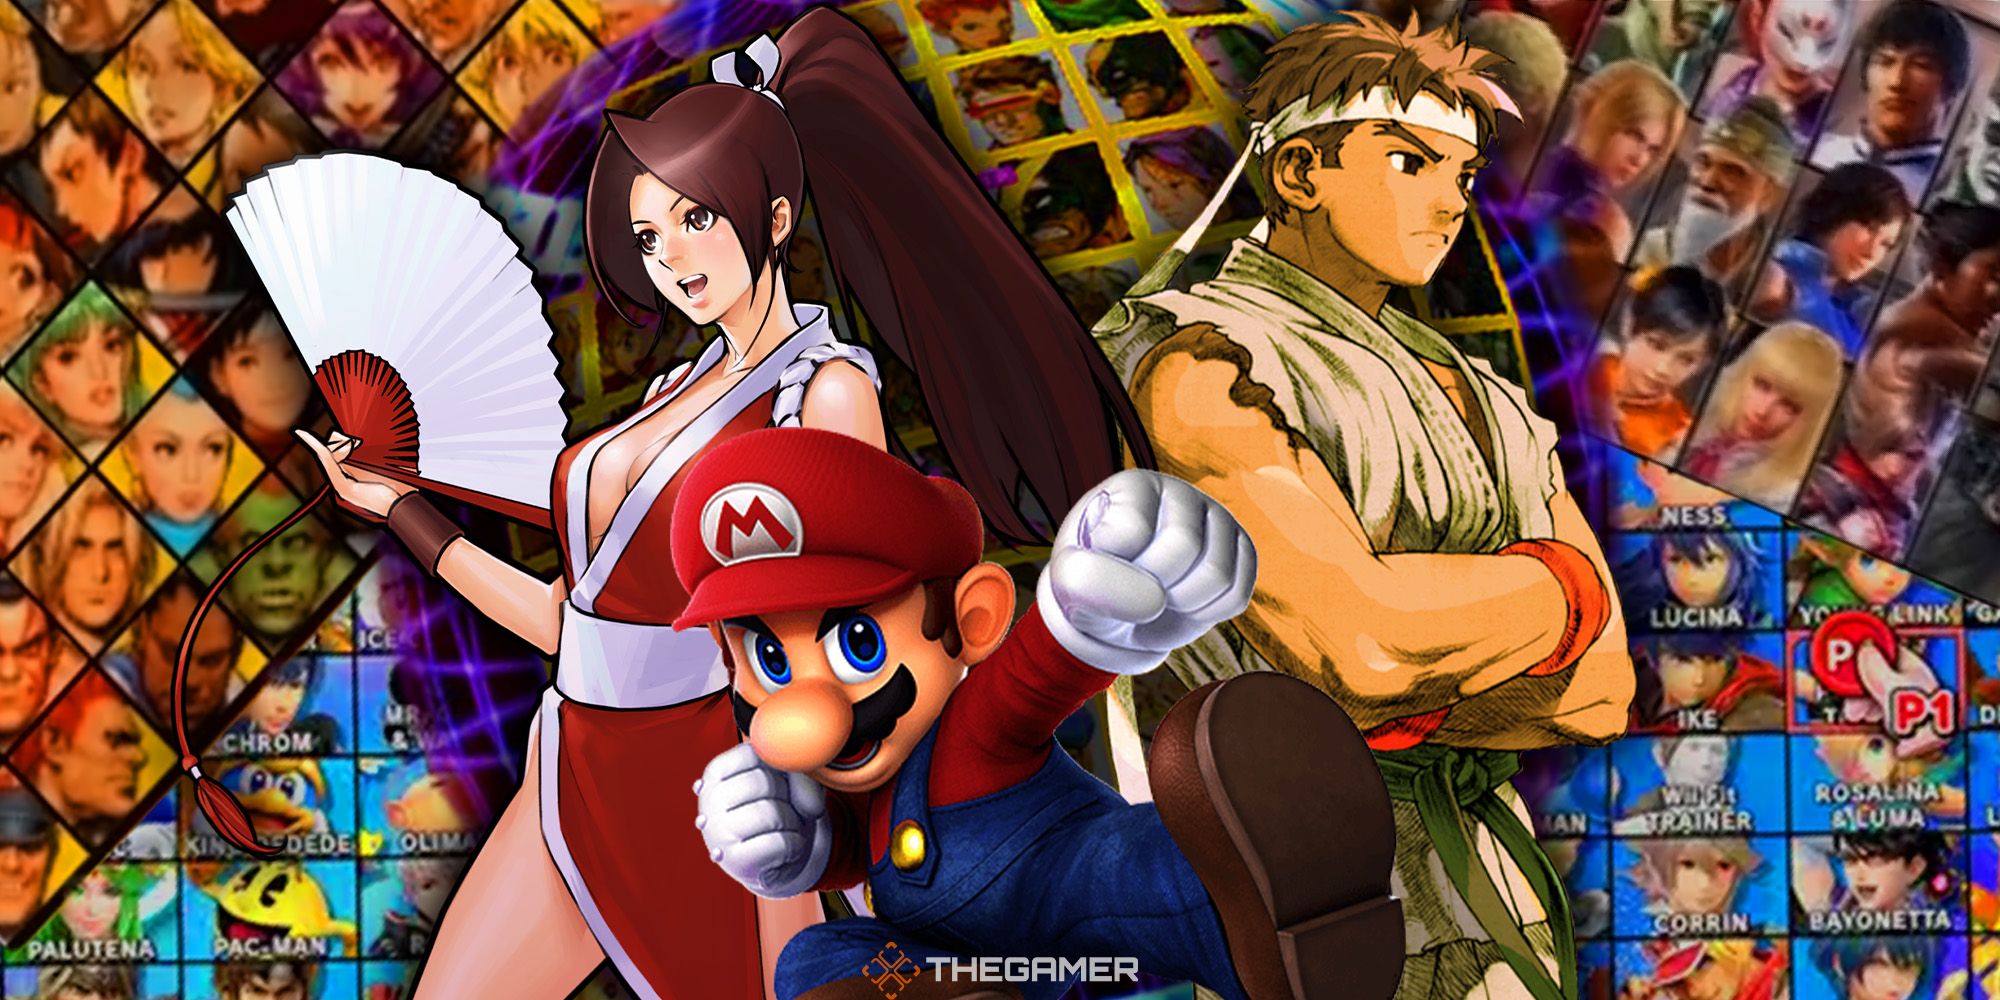 MVSX Home Arcade cabinet revealed with 50 classic SNK titles